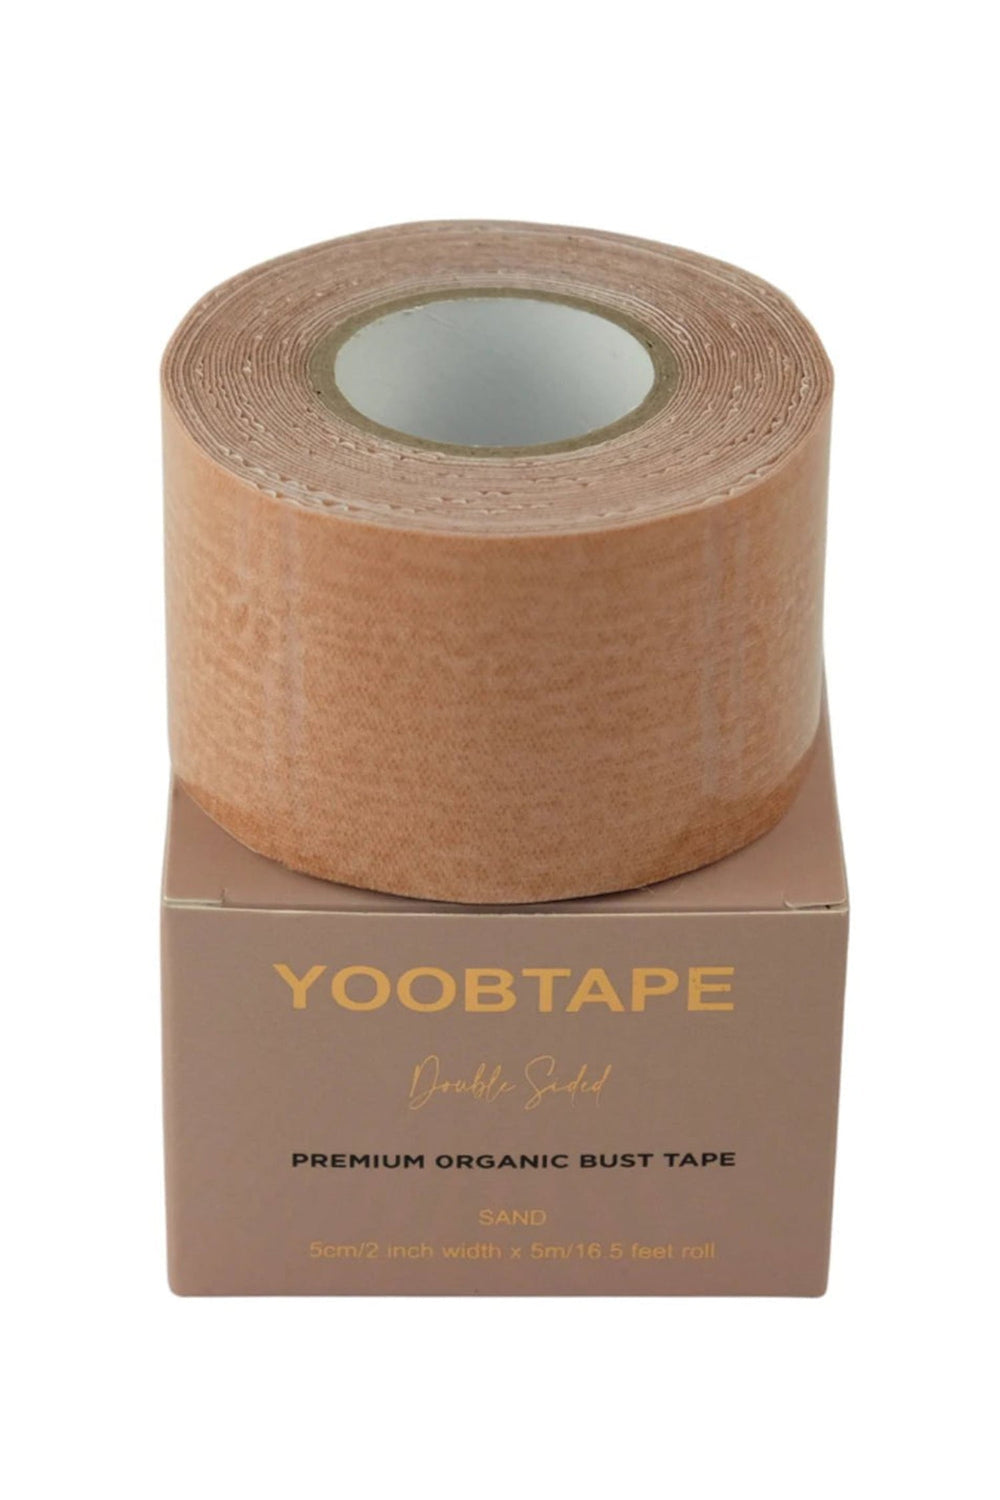 YOOBTAPE Premium Double Sided Bust Tape - Sand